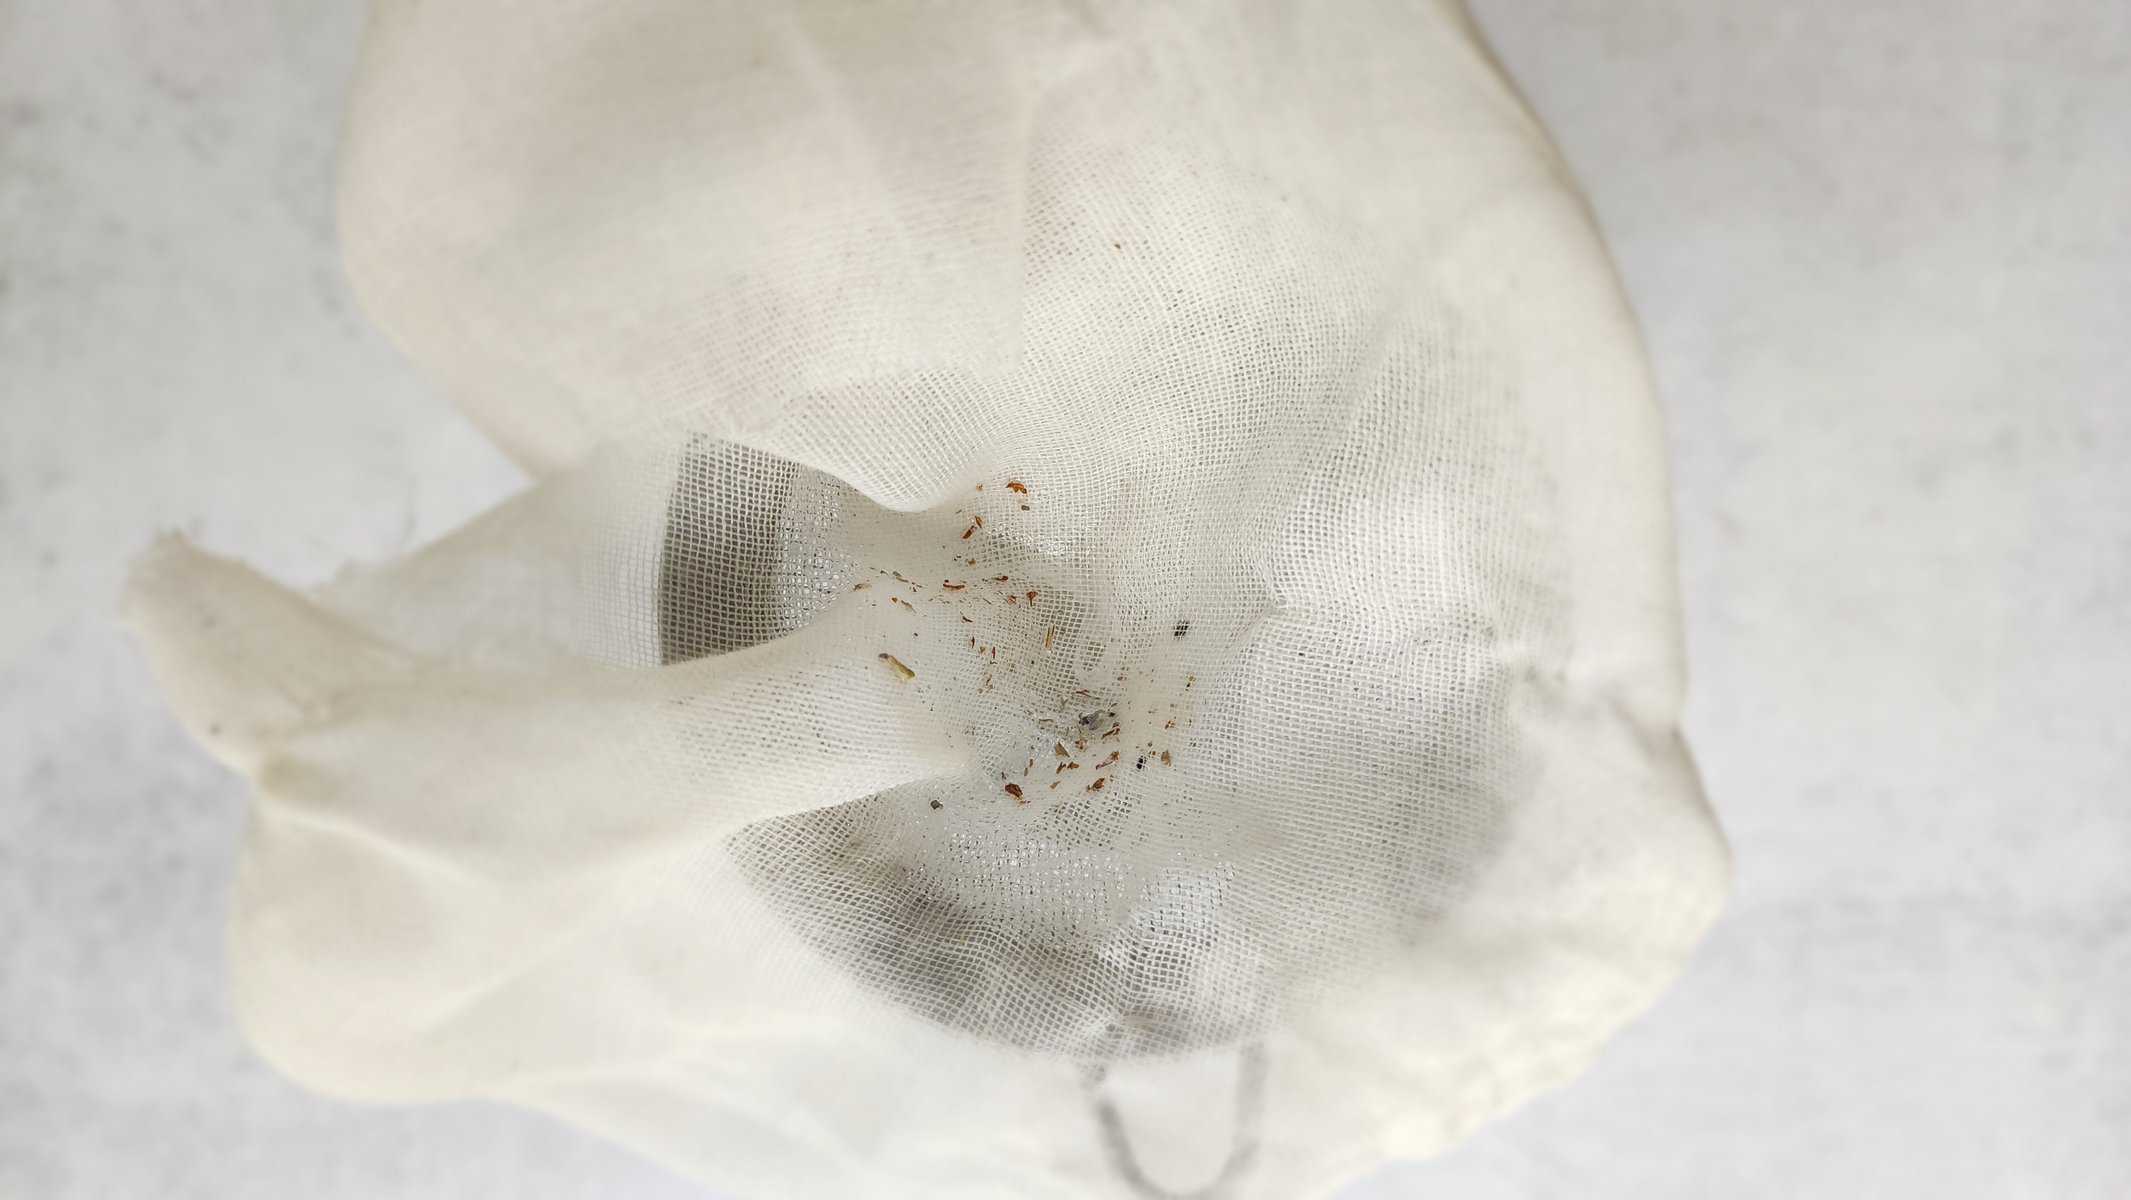 Top shot of the cheesecloth showing the debris removed from the lavender simple syrup